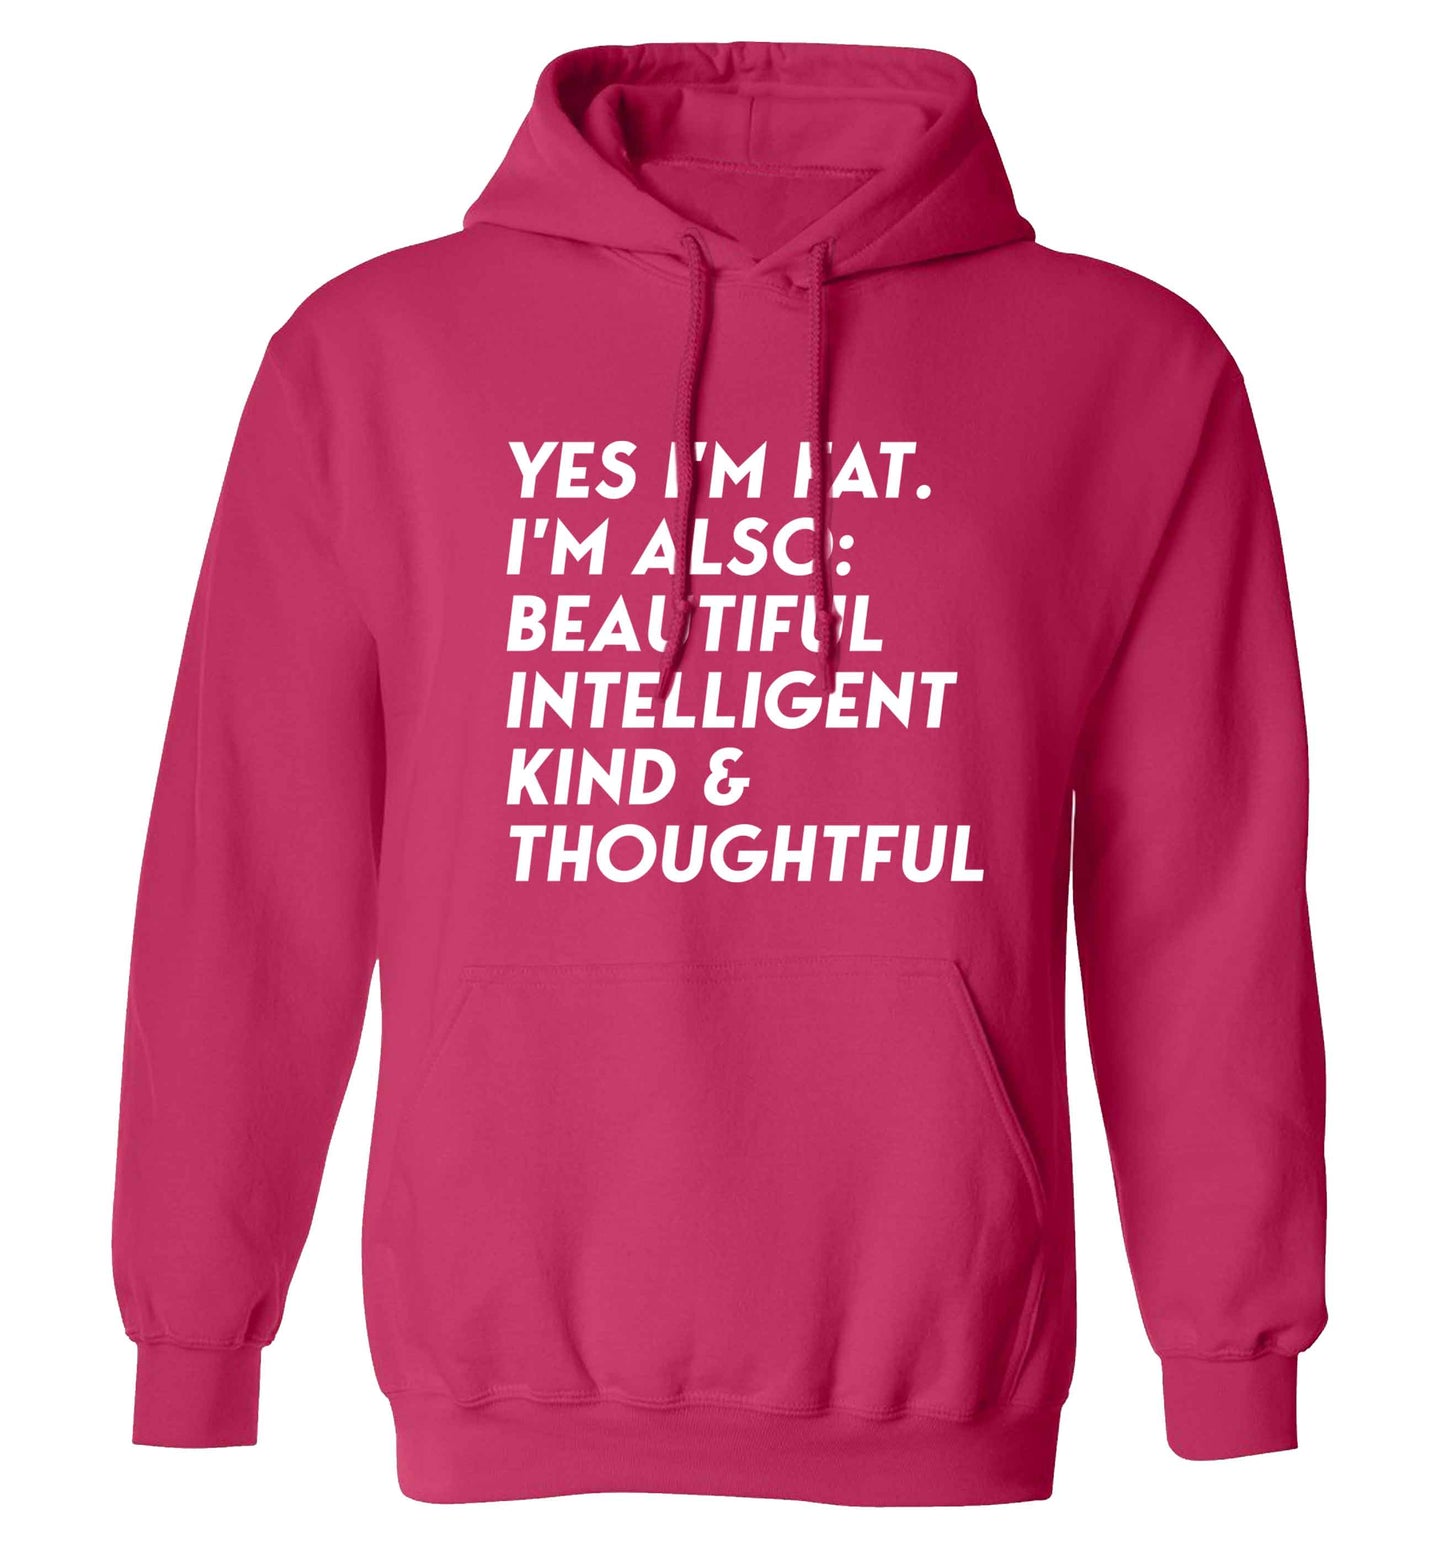 Yes I'm fat. I'm also: Beautiful intelligent kind and thoughtful adults unisex pink hoodie 2XL